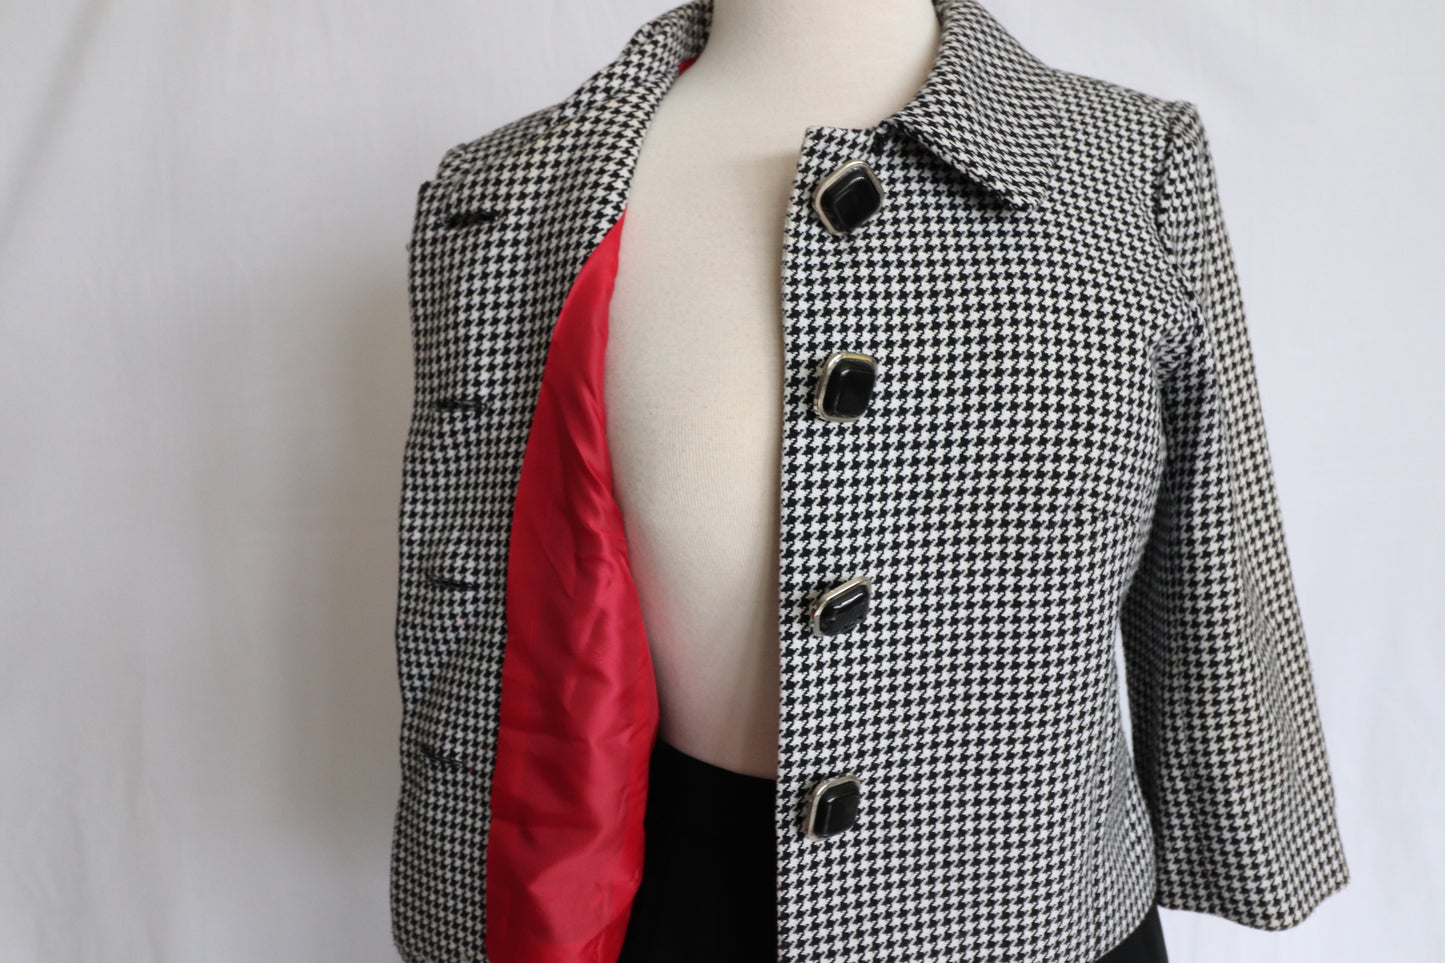 Vintage Houndstooth Jacket with Retro Buttons